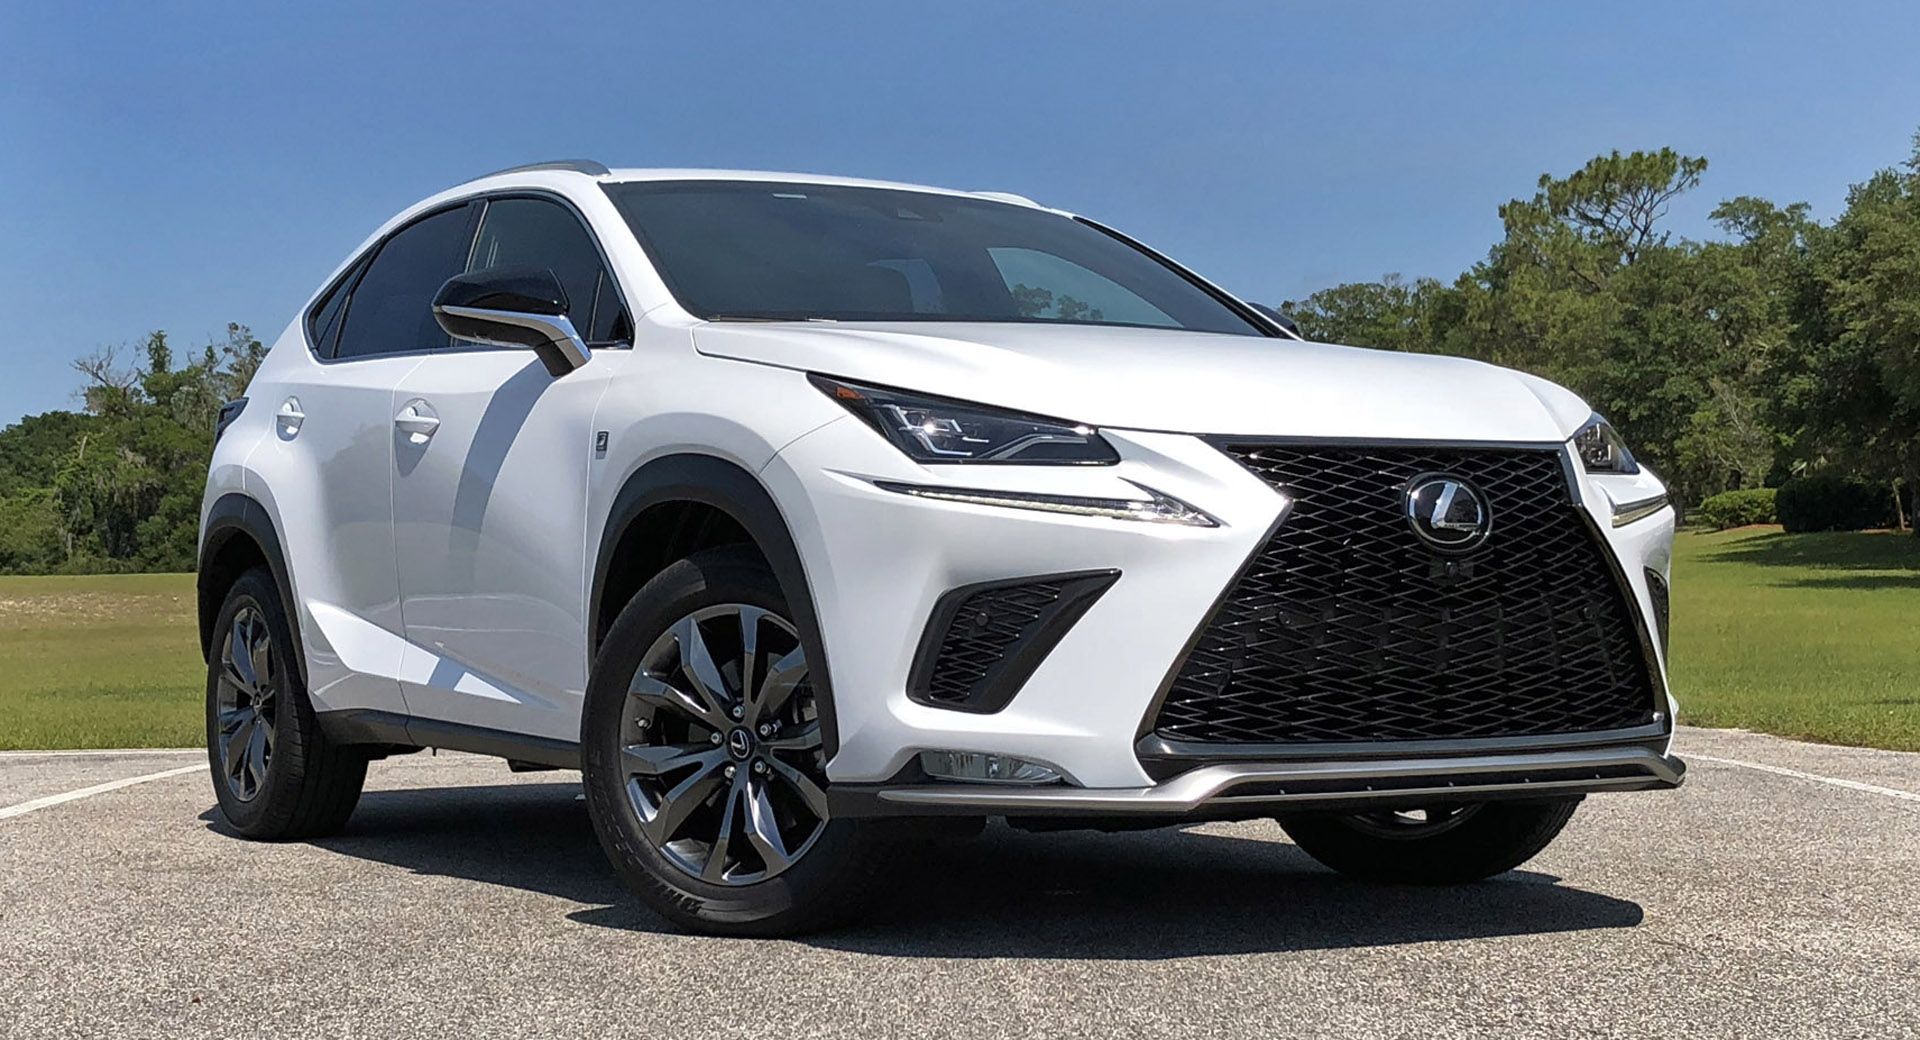 We Drive The 2018 Lexus NX 300 FSport, Ask Us Anything